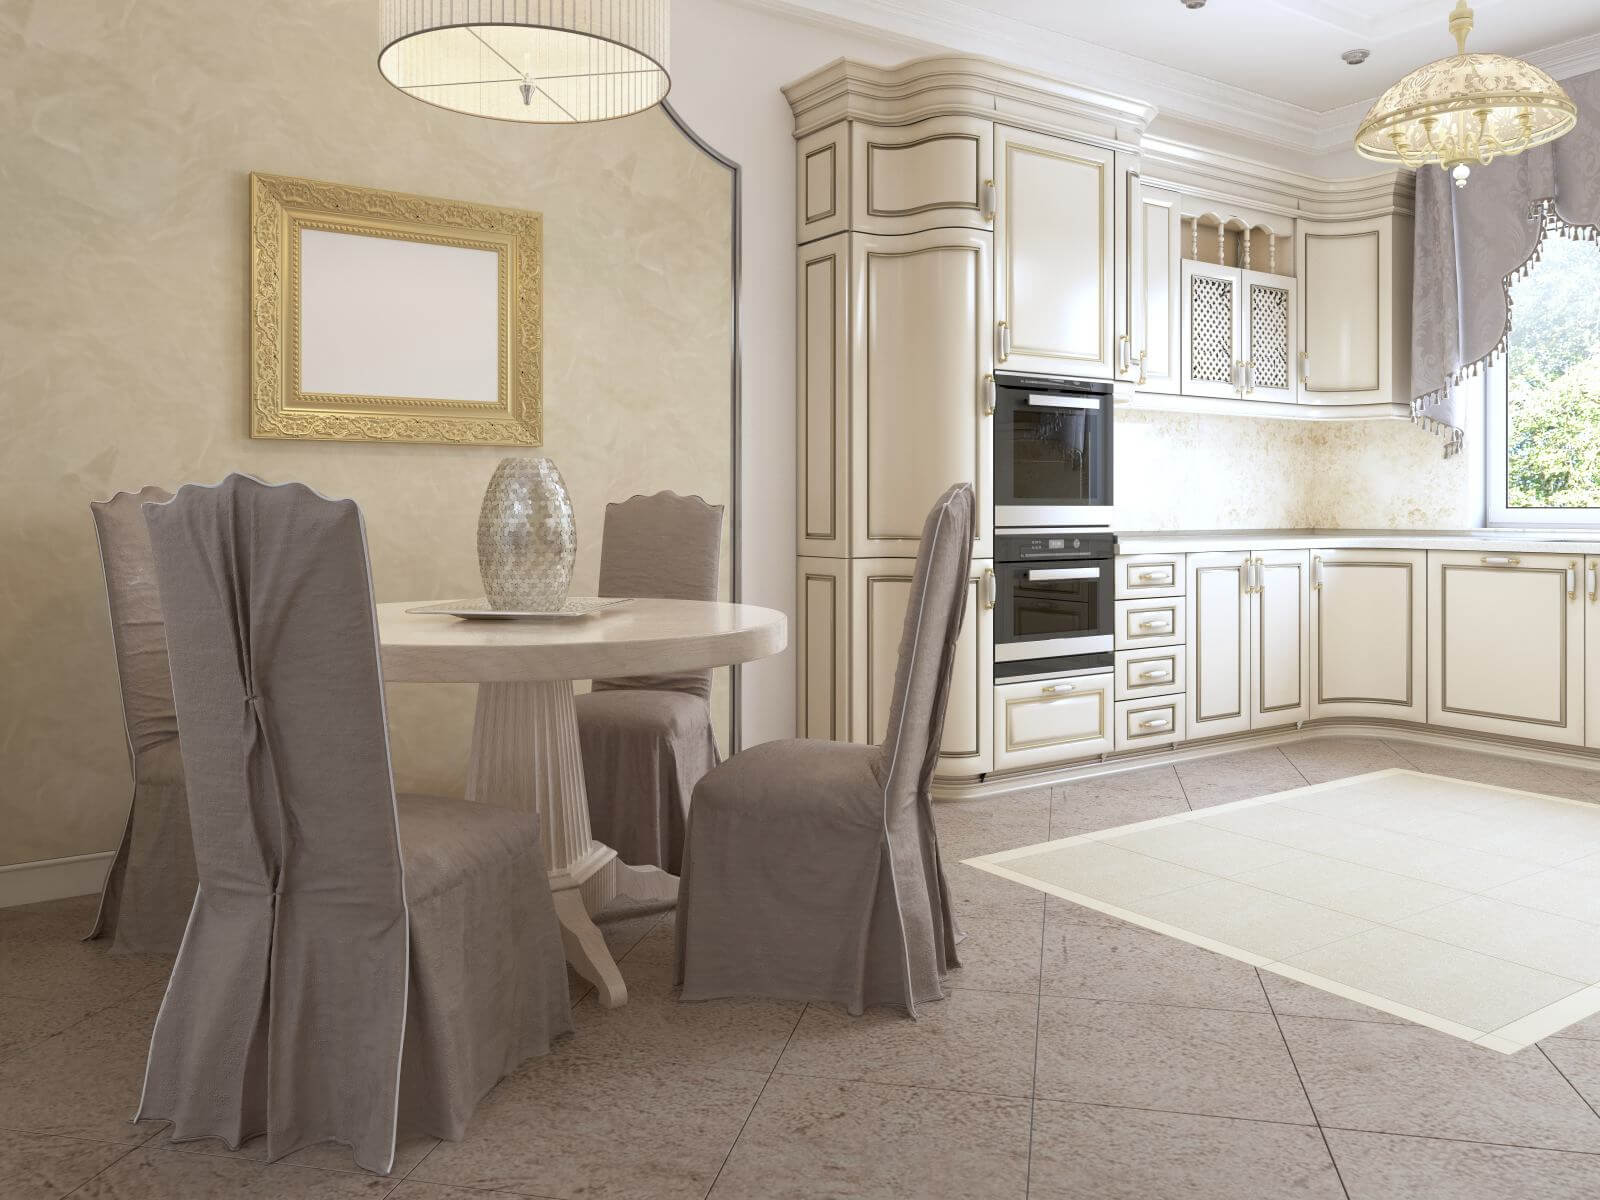 Luxurious modern kitchen in classic style in white colors with a dining table for four people. 3D rendering.